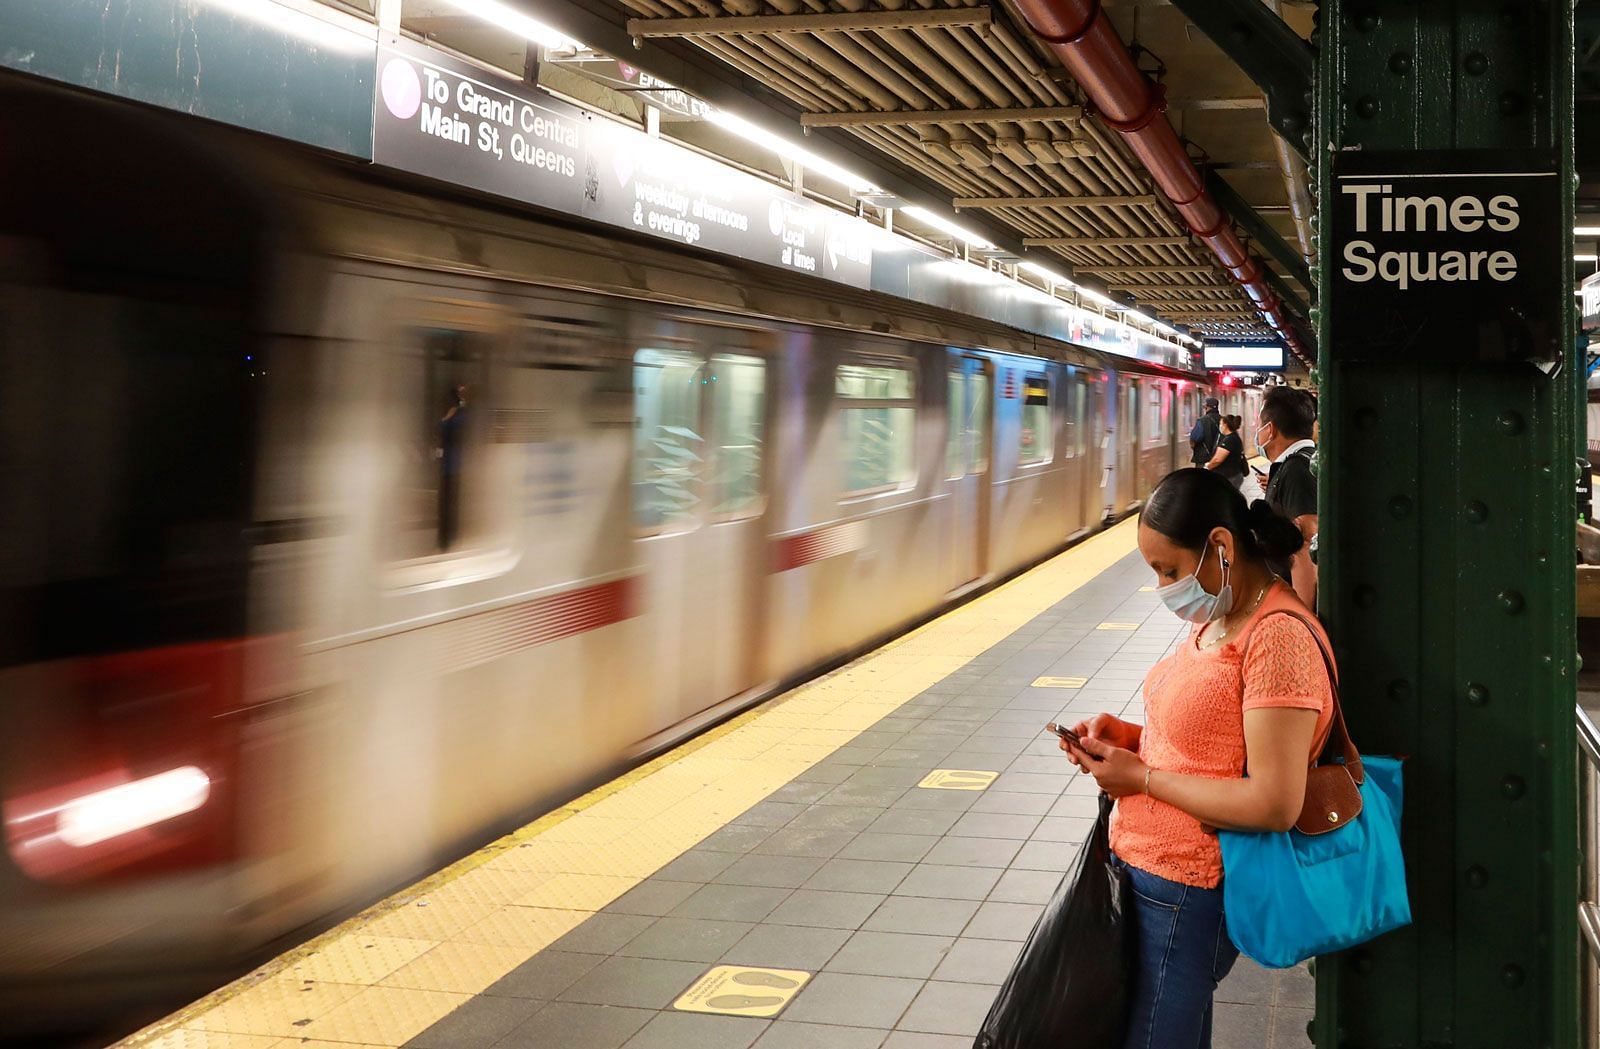 Times Square subway saw a shocking incident on January 15 (Image via Wang Ying/Getty Images)